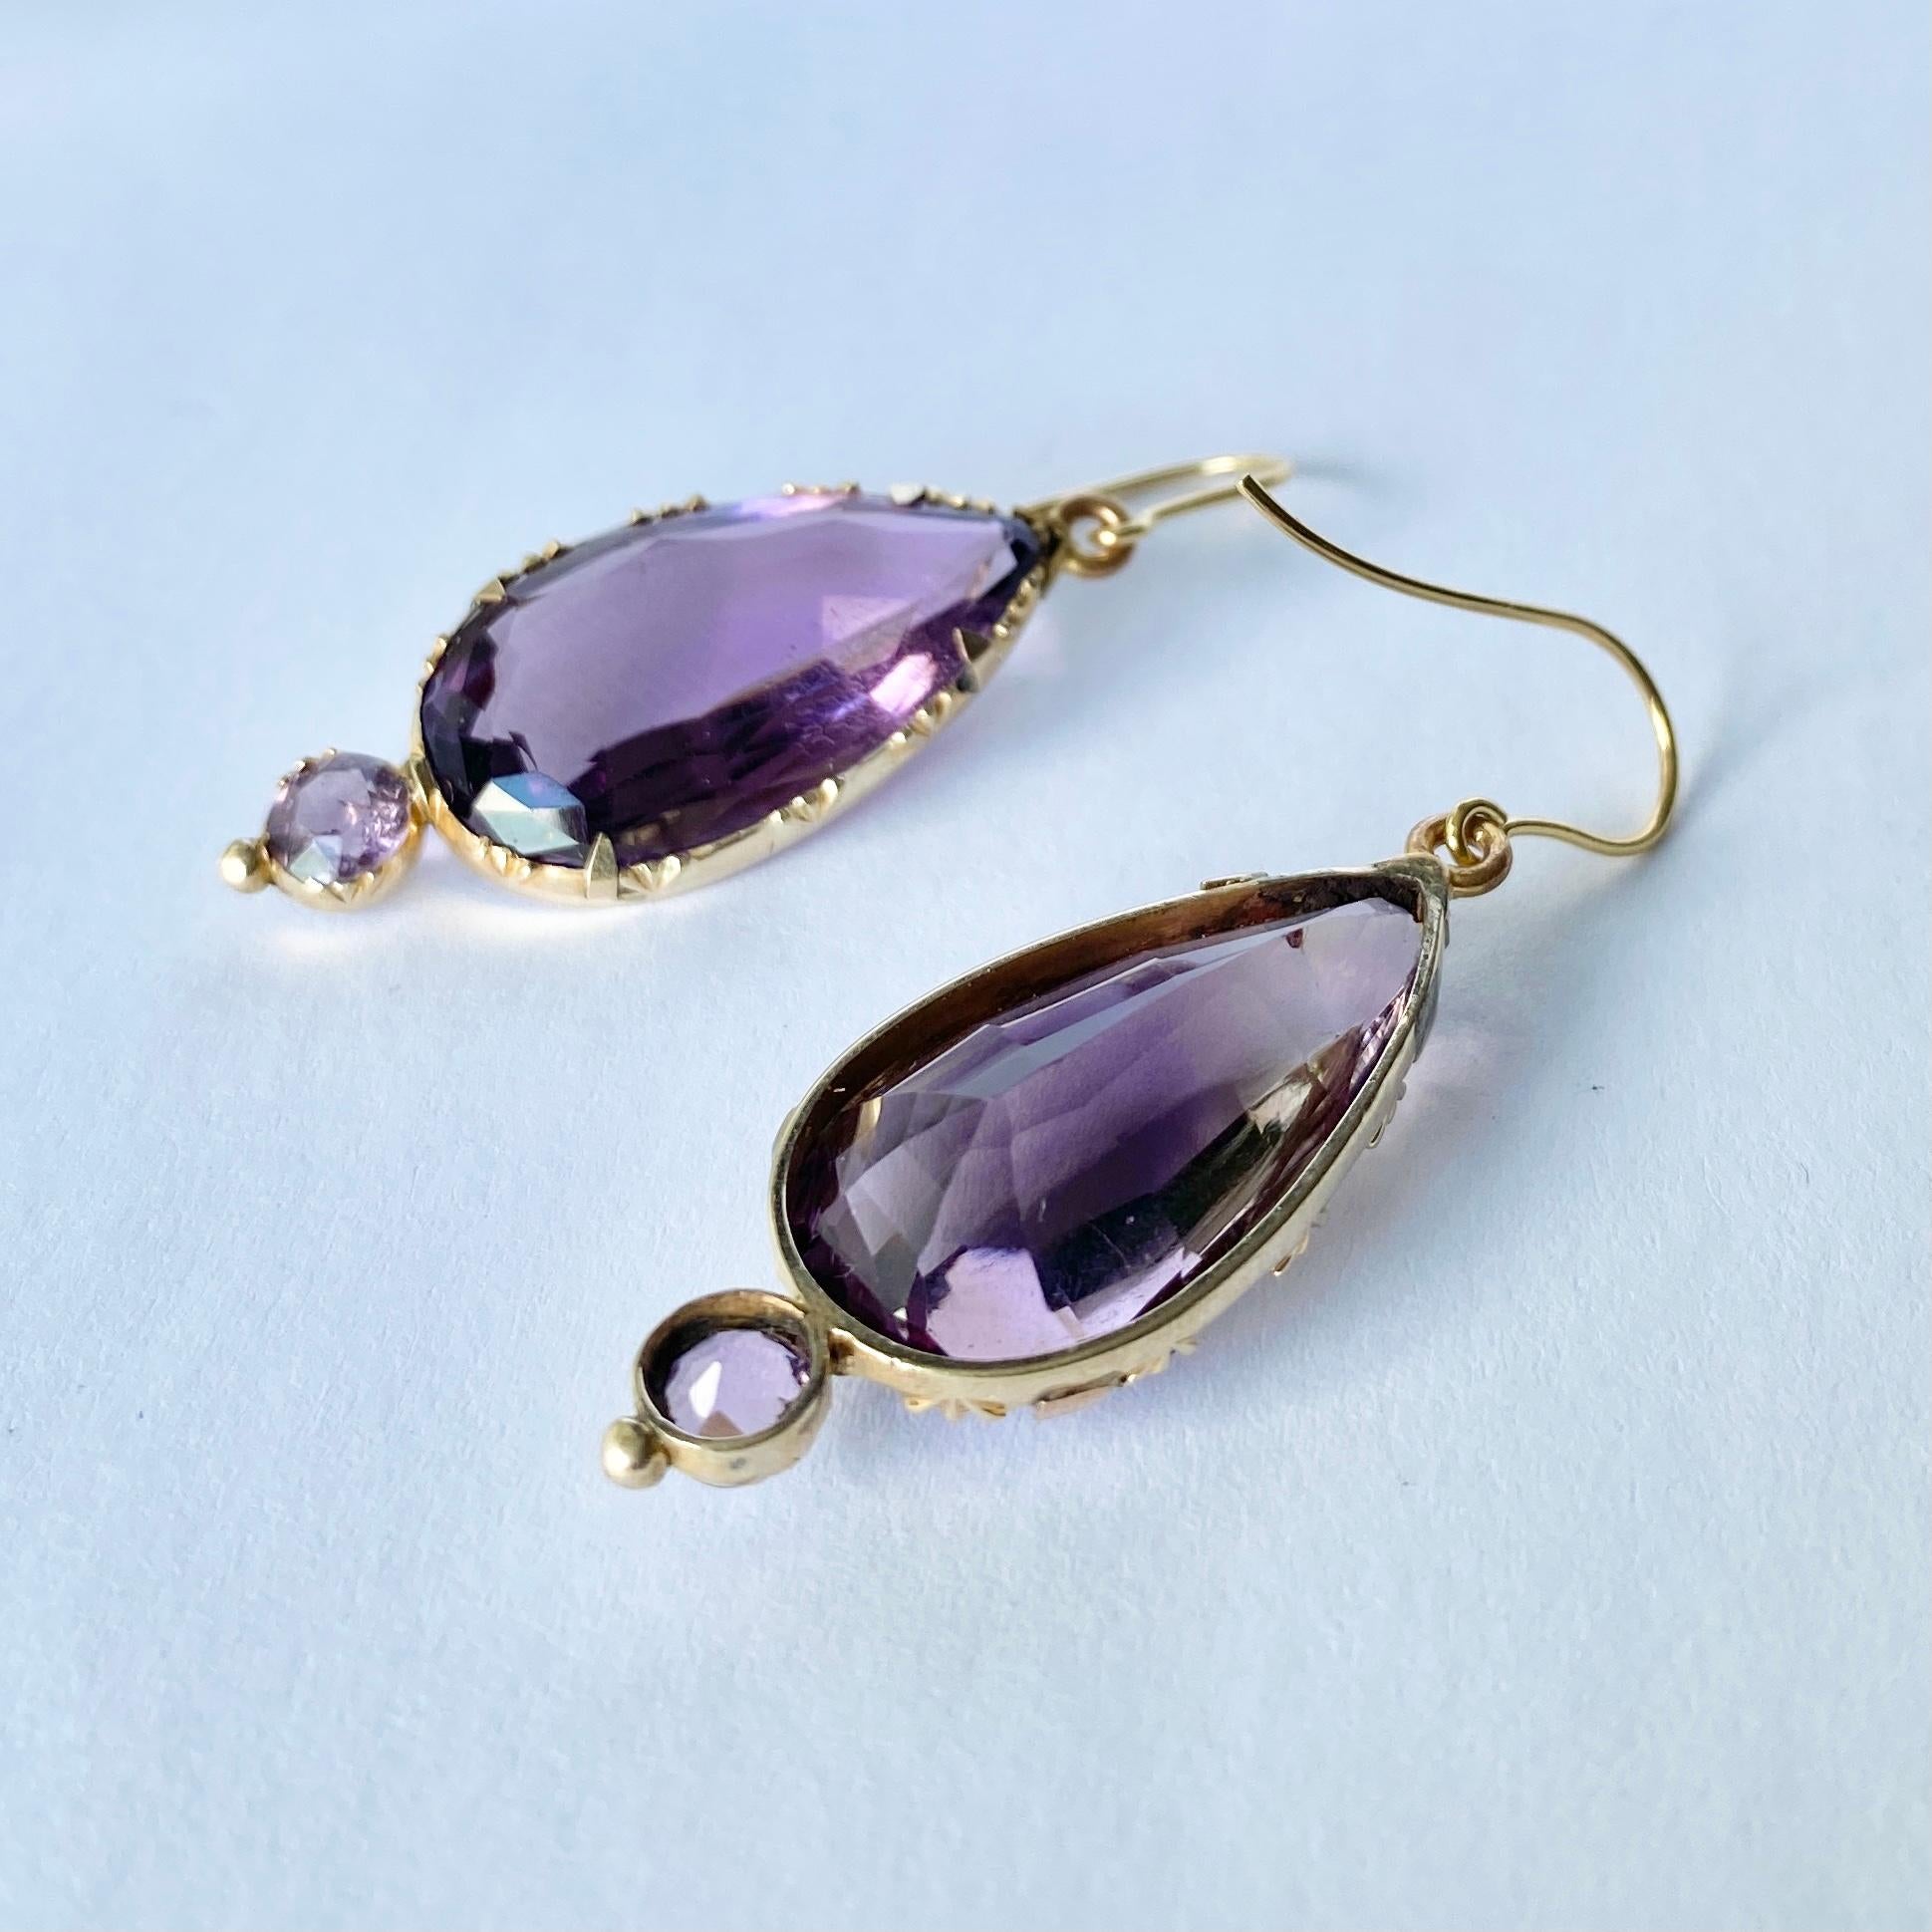 Striking victorian Amethyst drop earrings with charming detail around the setting. These earrings are modelled in 9ct gold. 

Total drop from ear: 47mm

Weight: 9g